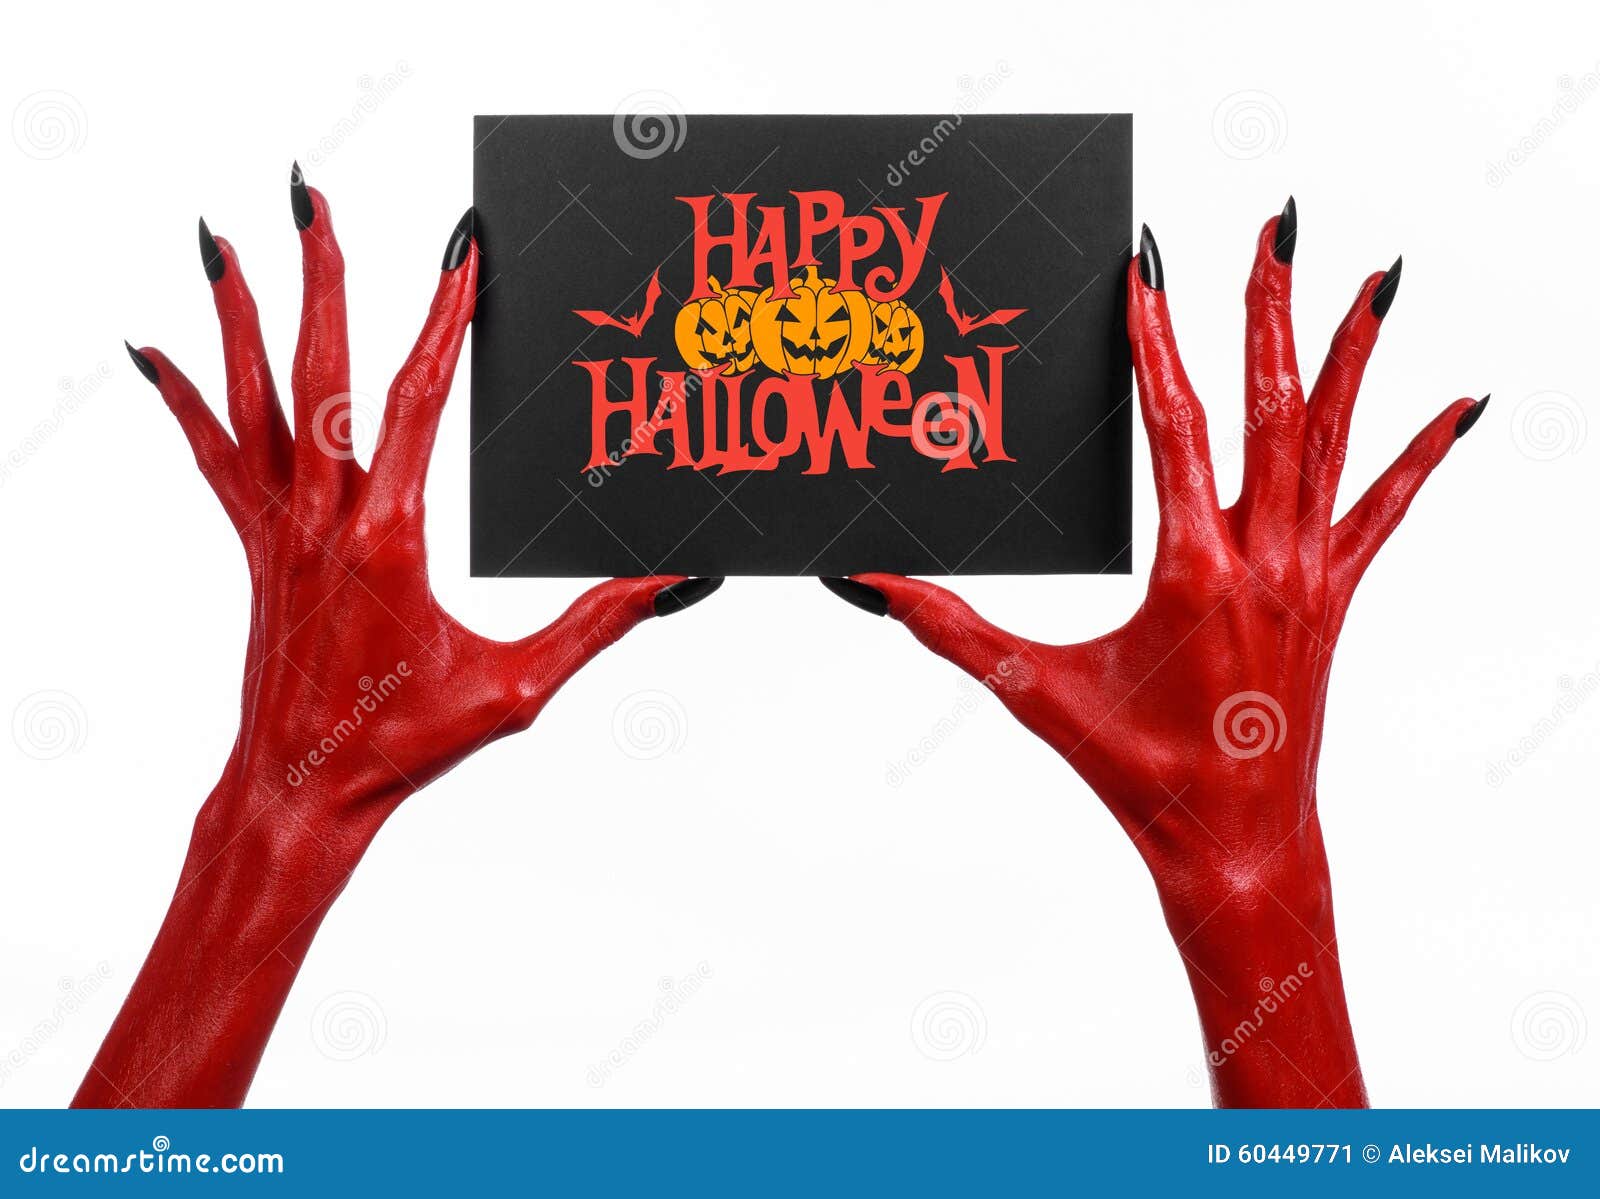 Postcard And Happy Halloween Theme: Red Devil Hand With ...